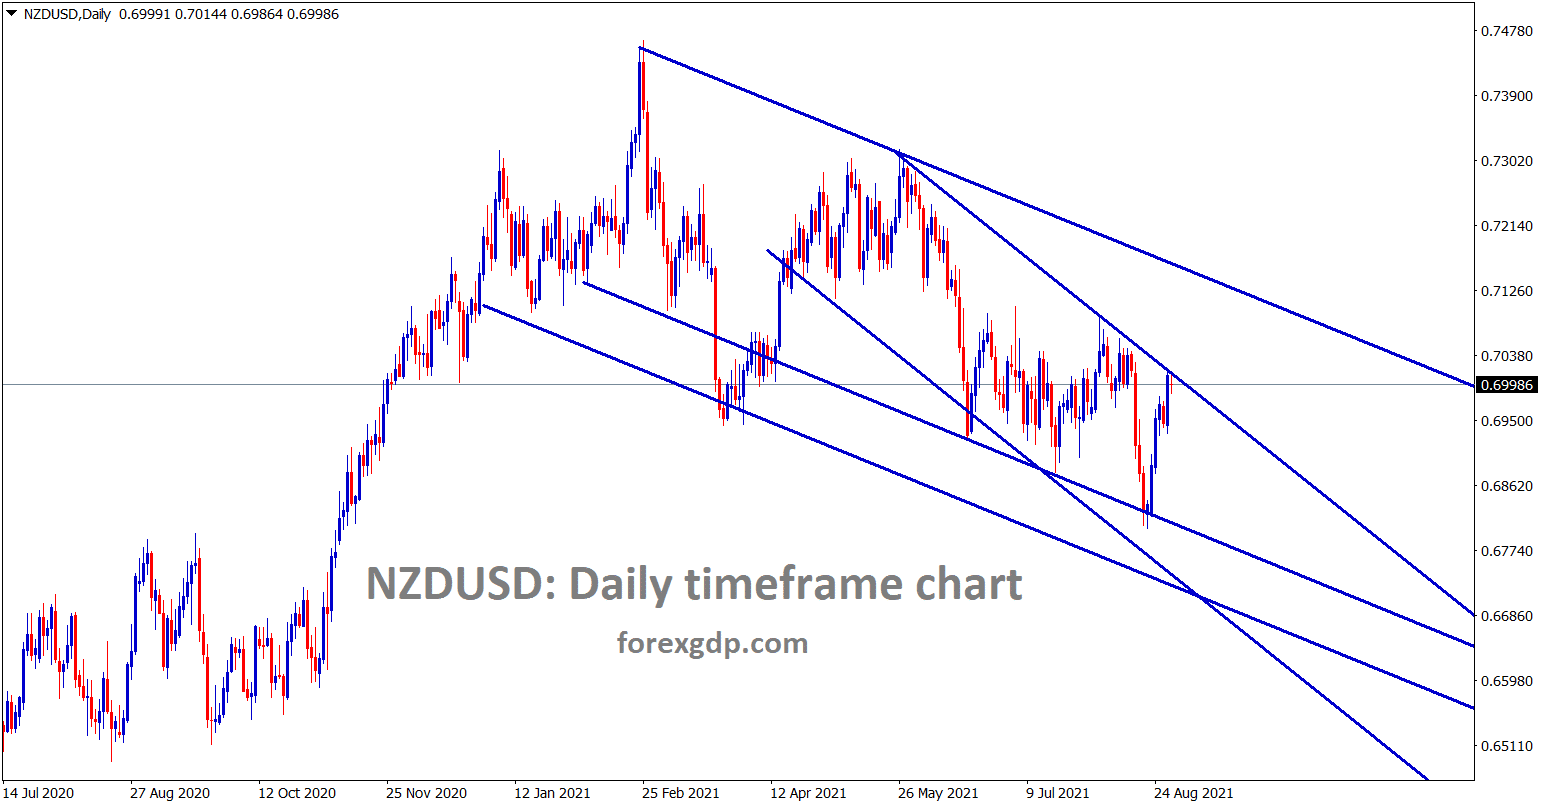 NZDUSD hits the lower high of the minor descending channel wait for reversal or breakout